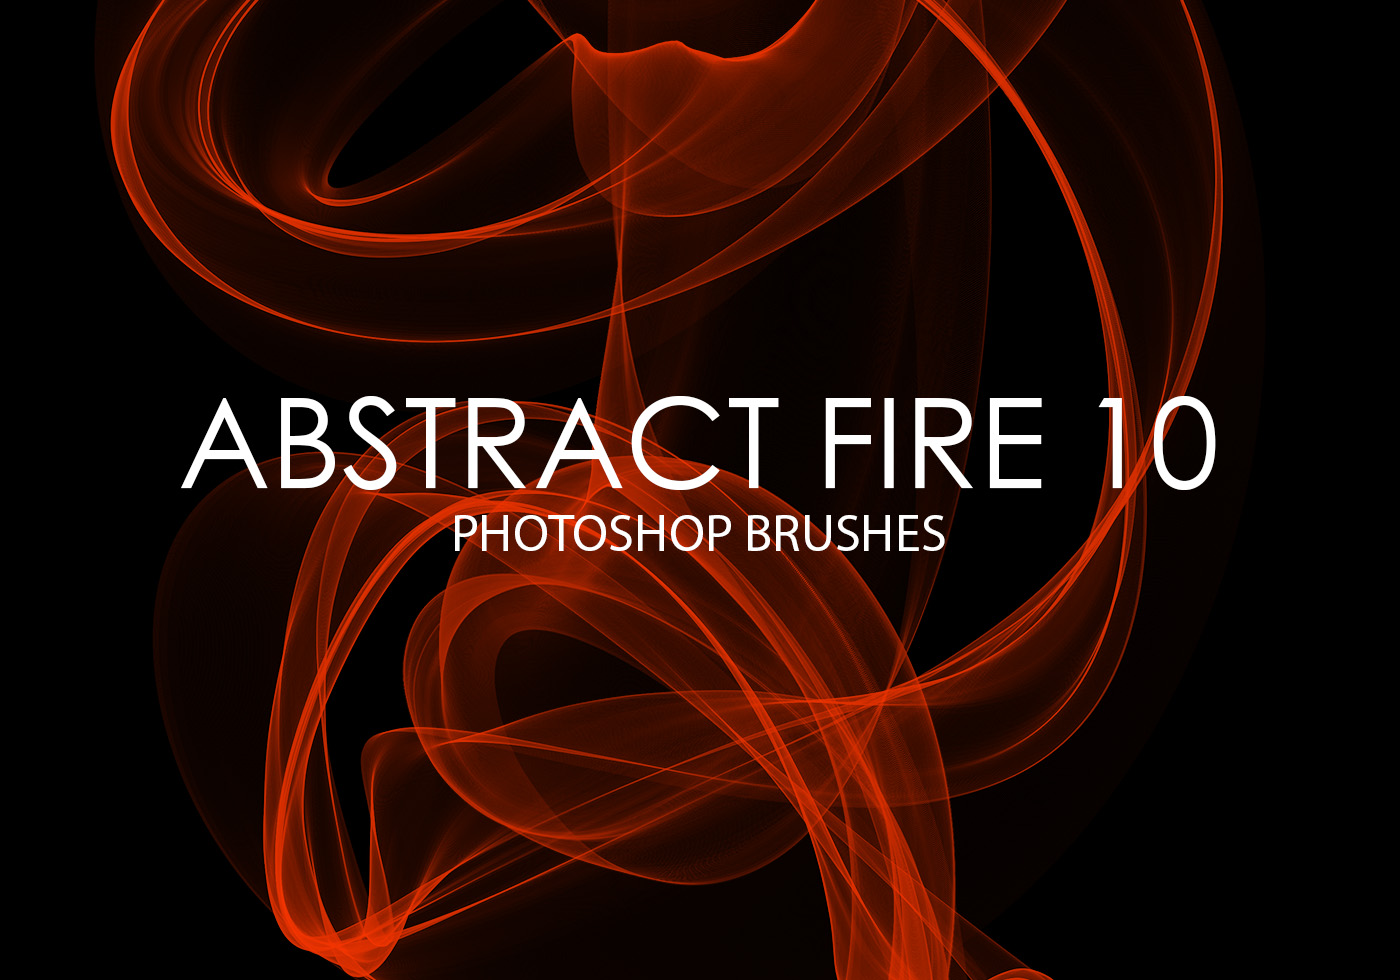 Free Abstract Fire Photoshop Brushes